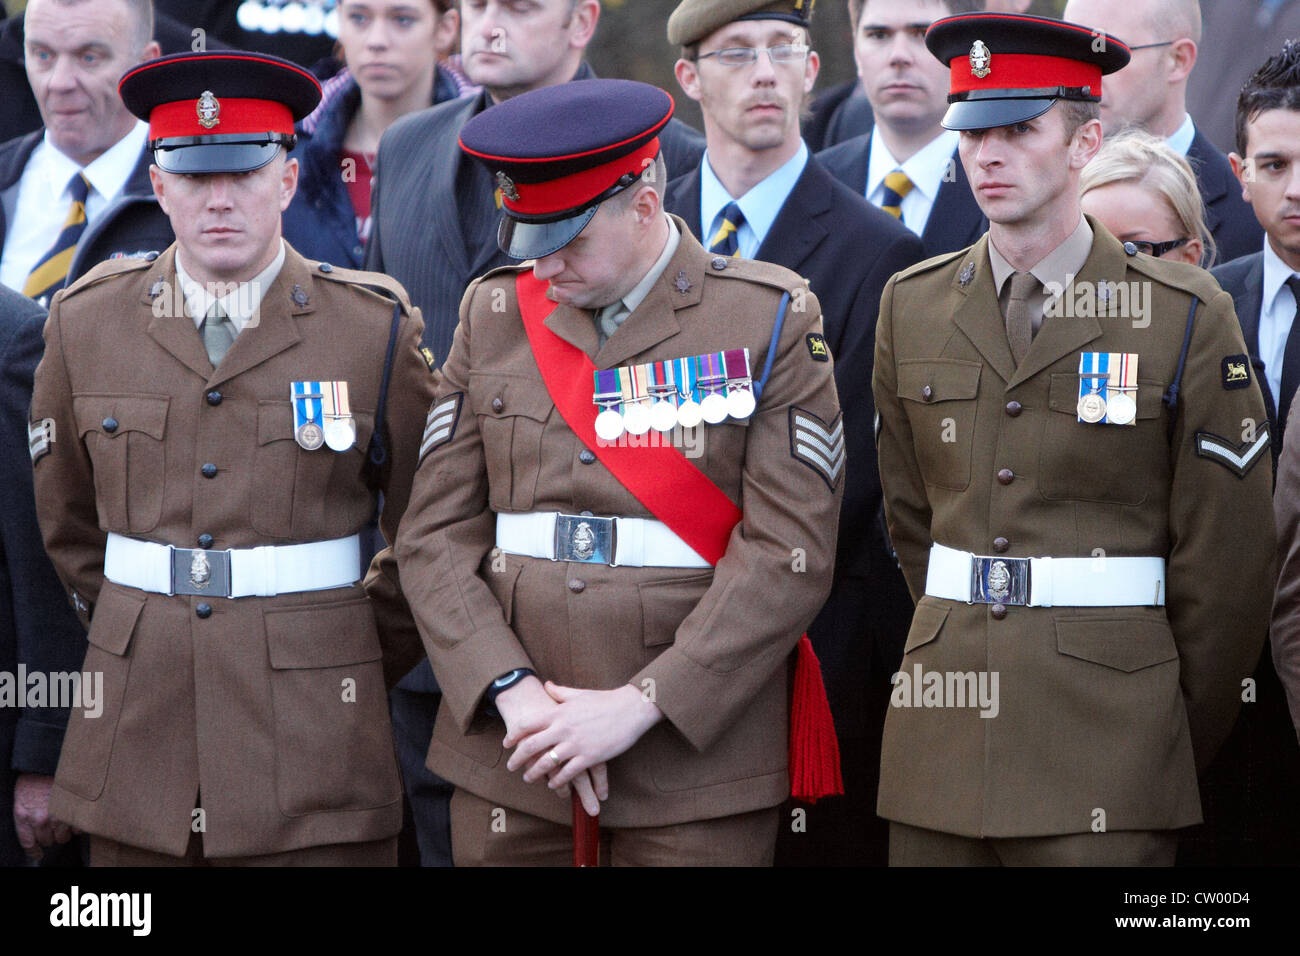 Friends, family & colleagues of L/Cpl Peter Eustace react during a ...